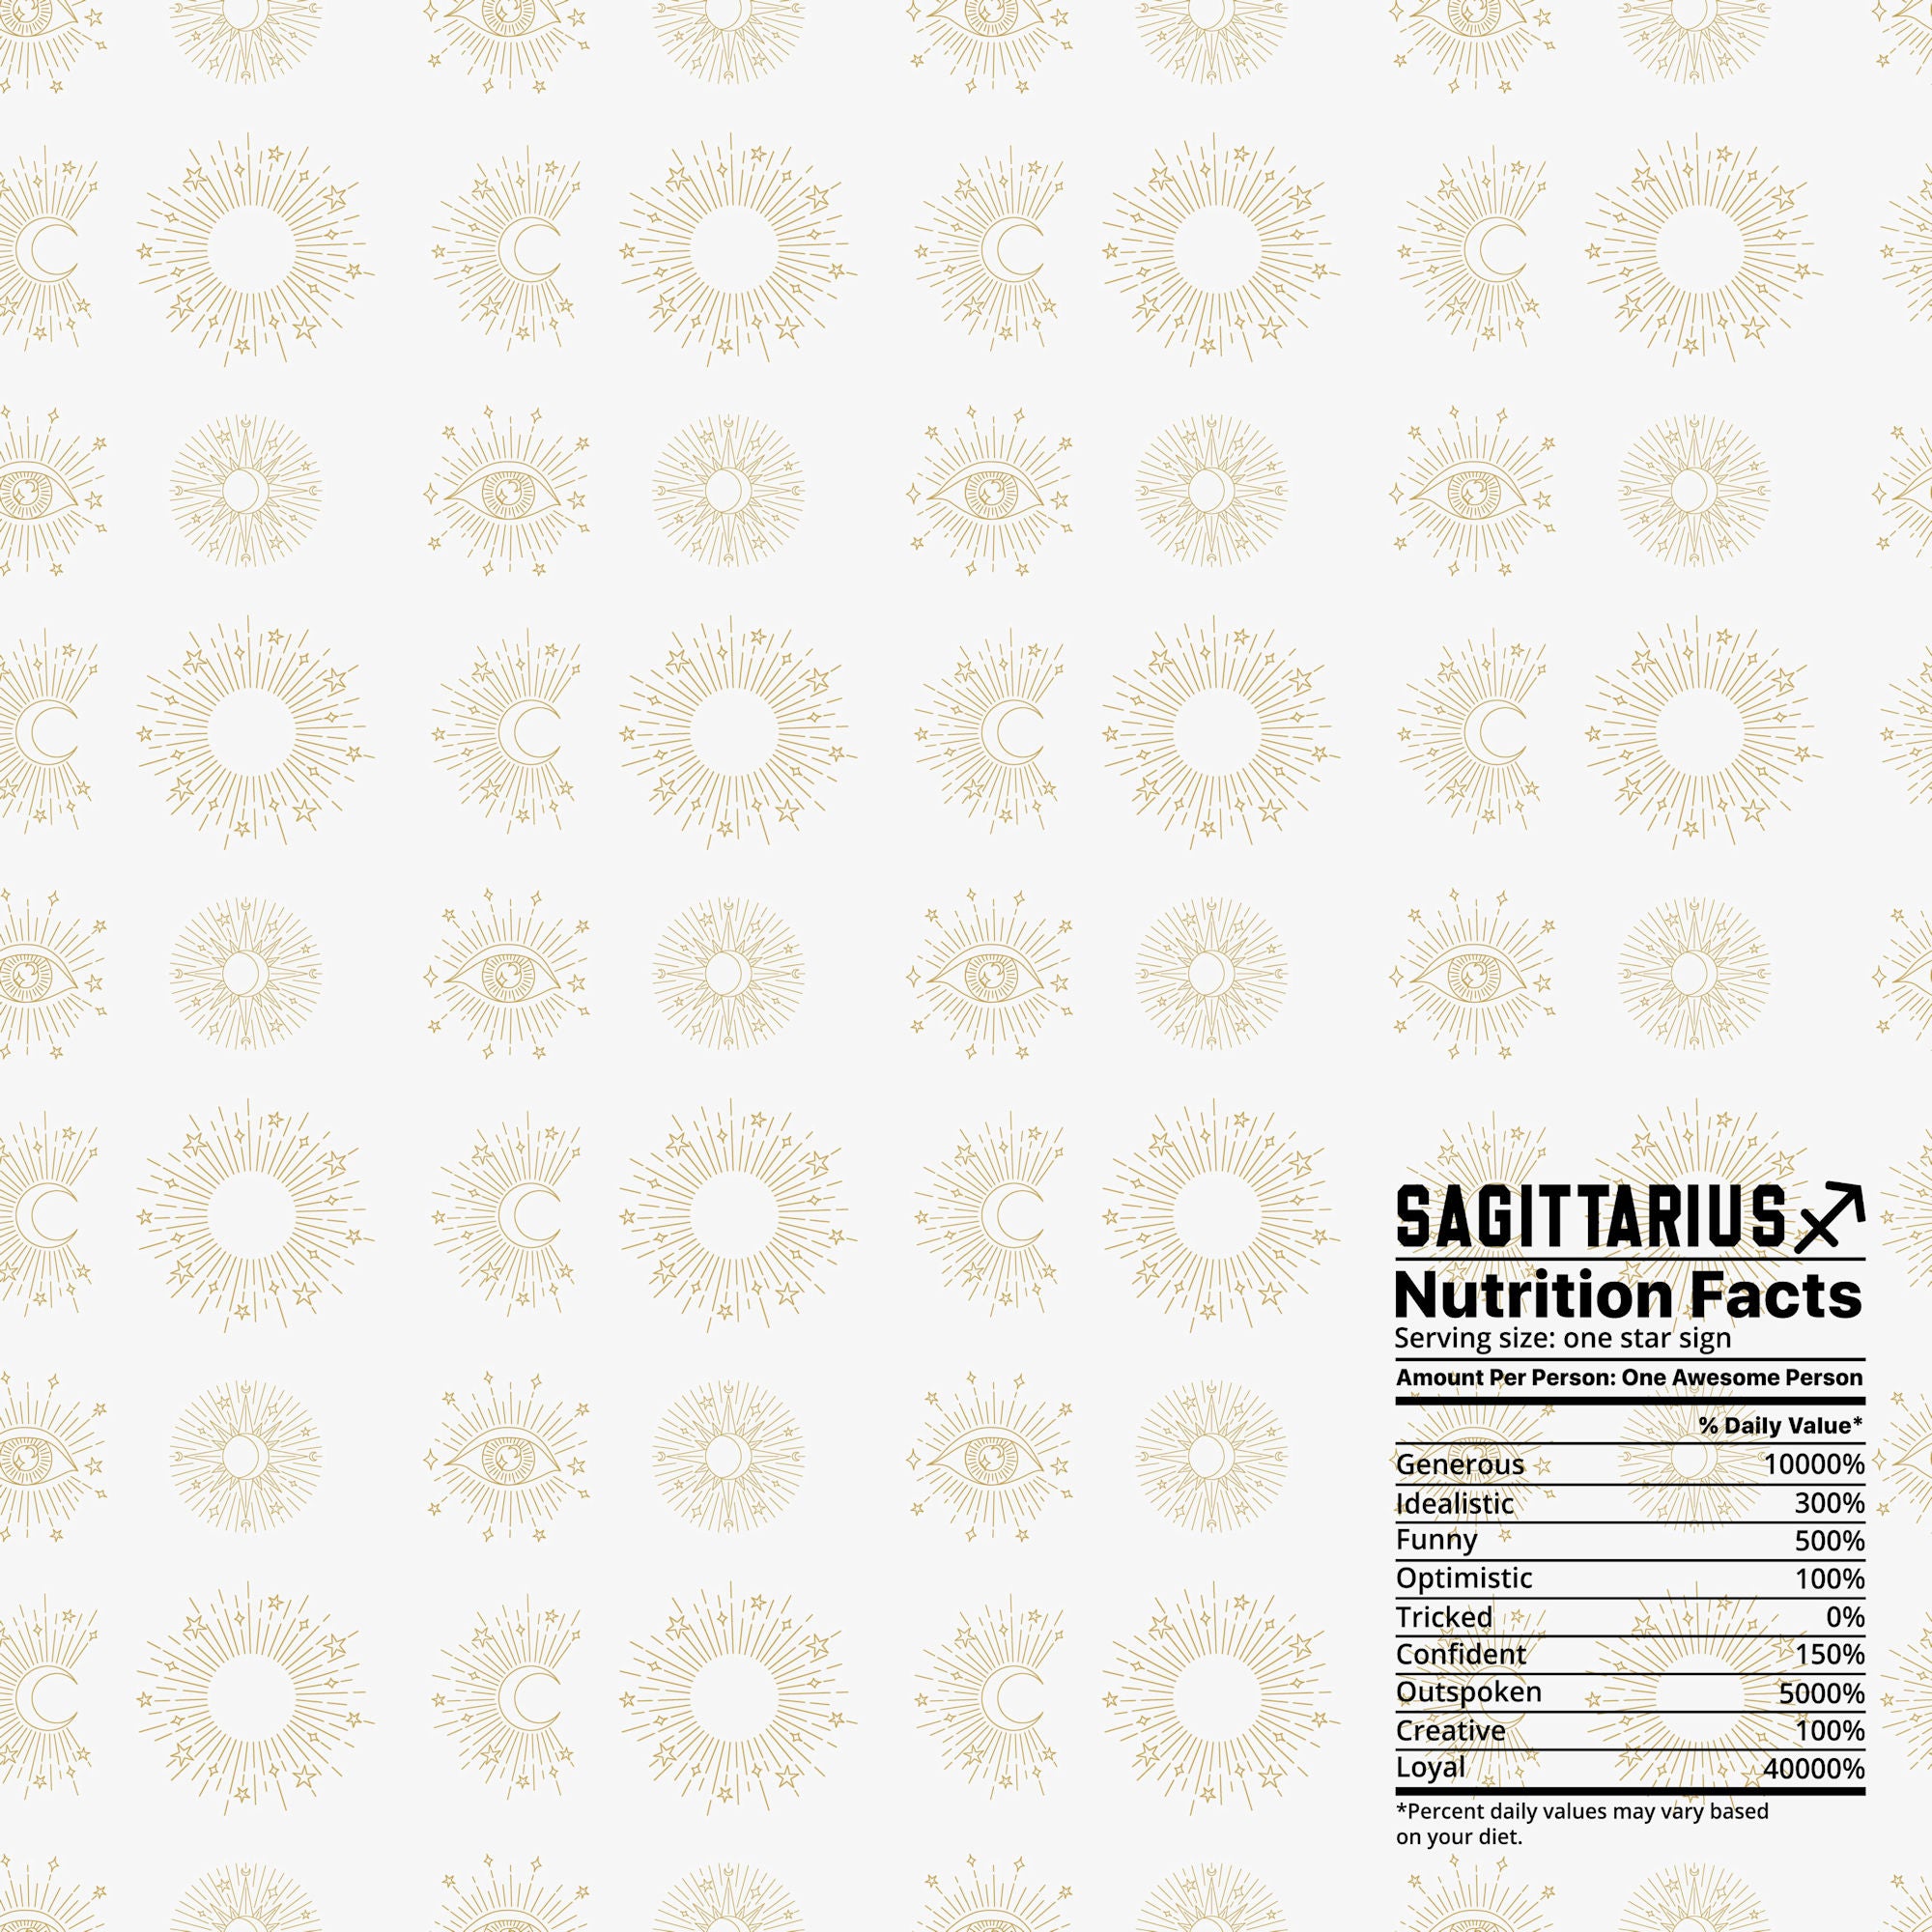 Astrology Collection Sagittarius 12 x 12 Double-Sided Scrapbook Paper by SSC Designs